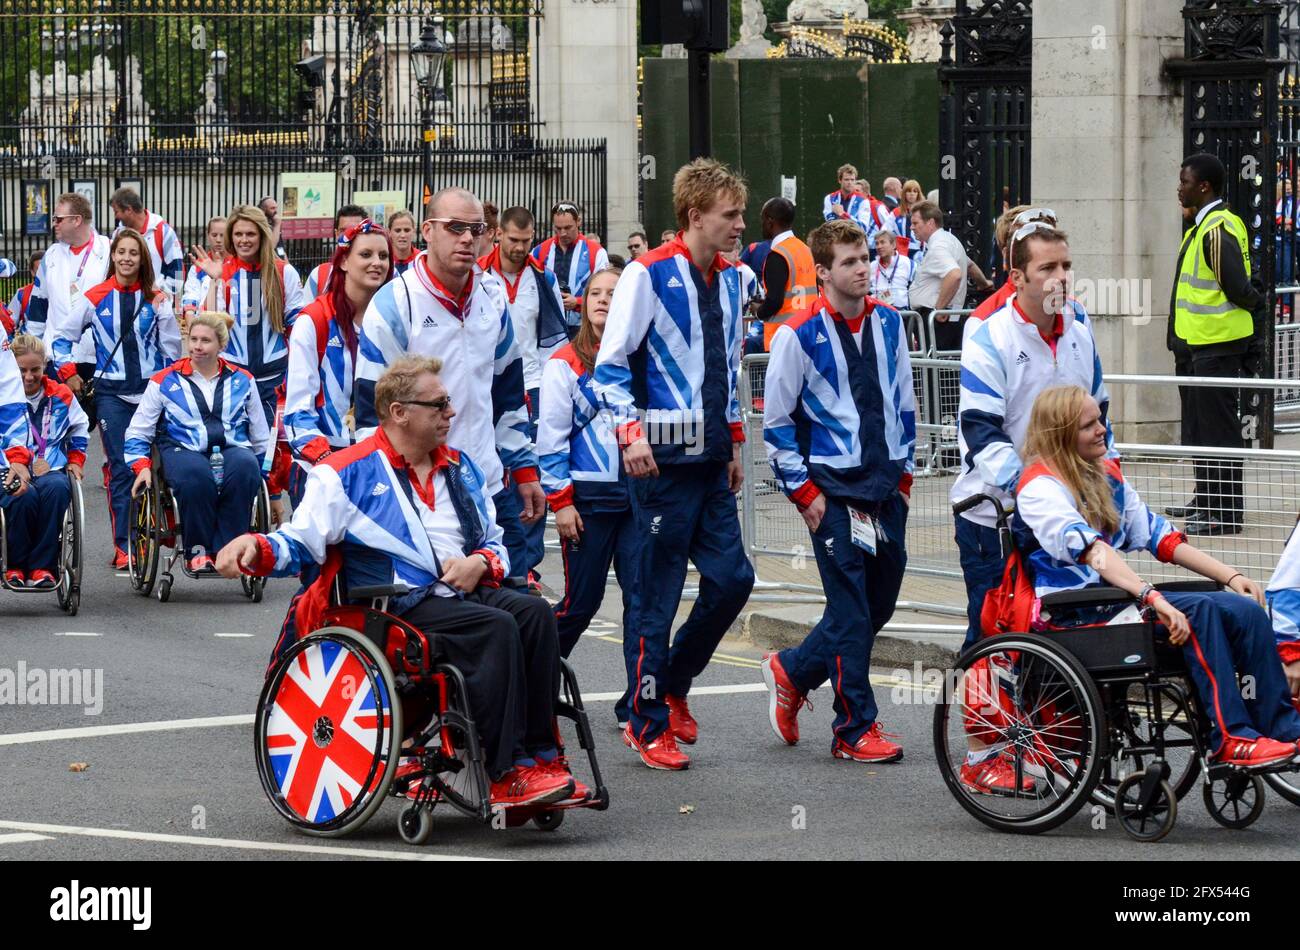 Paralympians of Team GB Olympians leaving Buckingham Palace after the parade. London 2012 Olympics competitors, some in wheelchairs Stock Photo